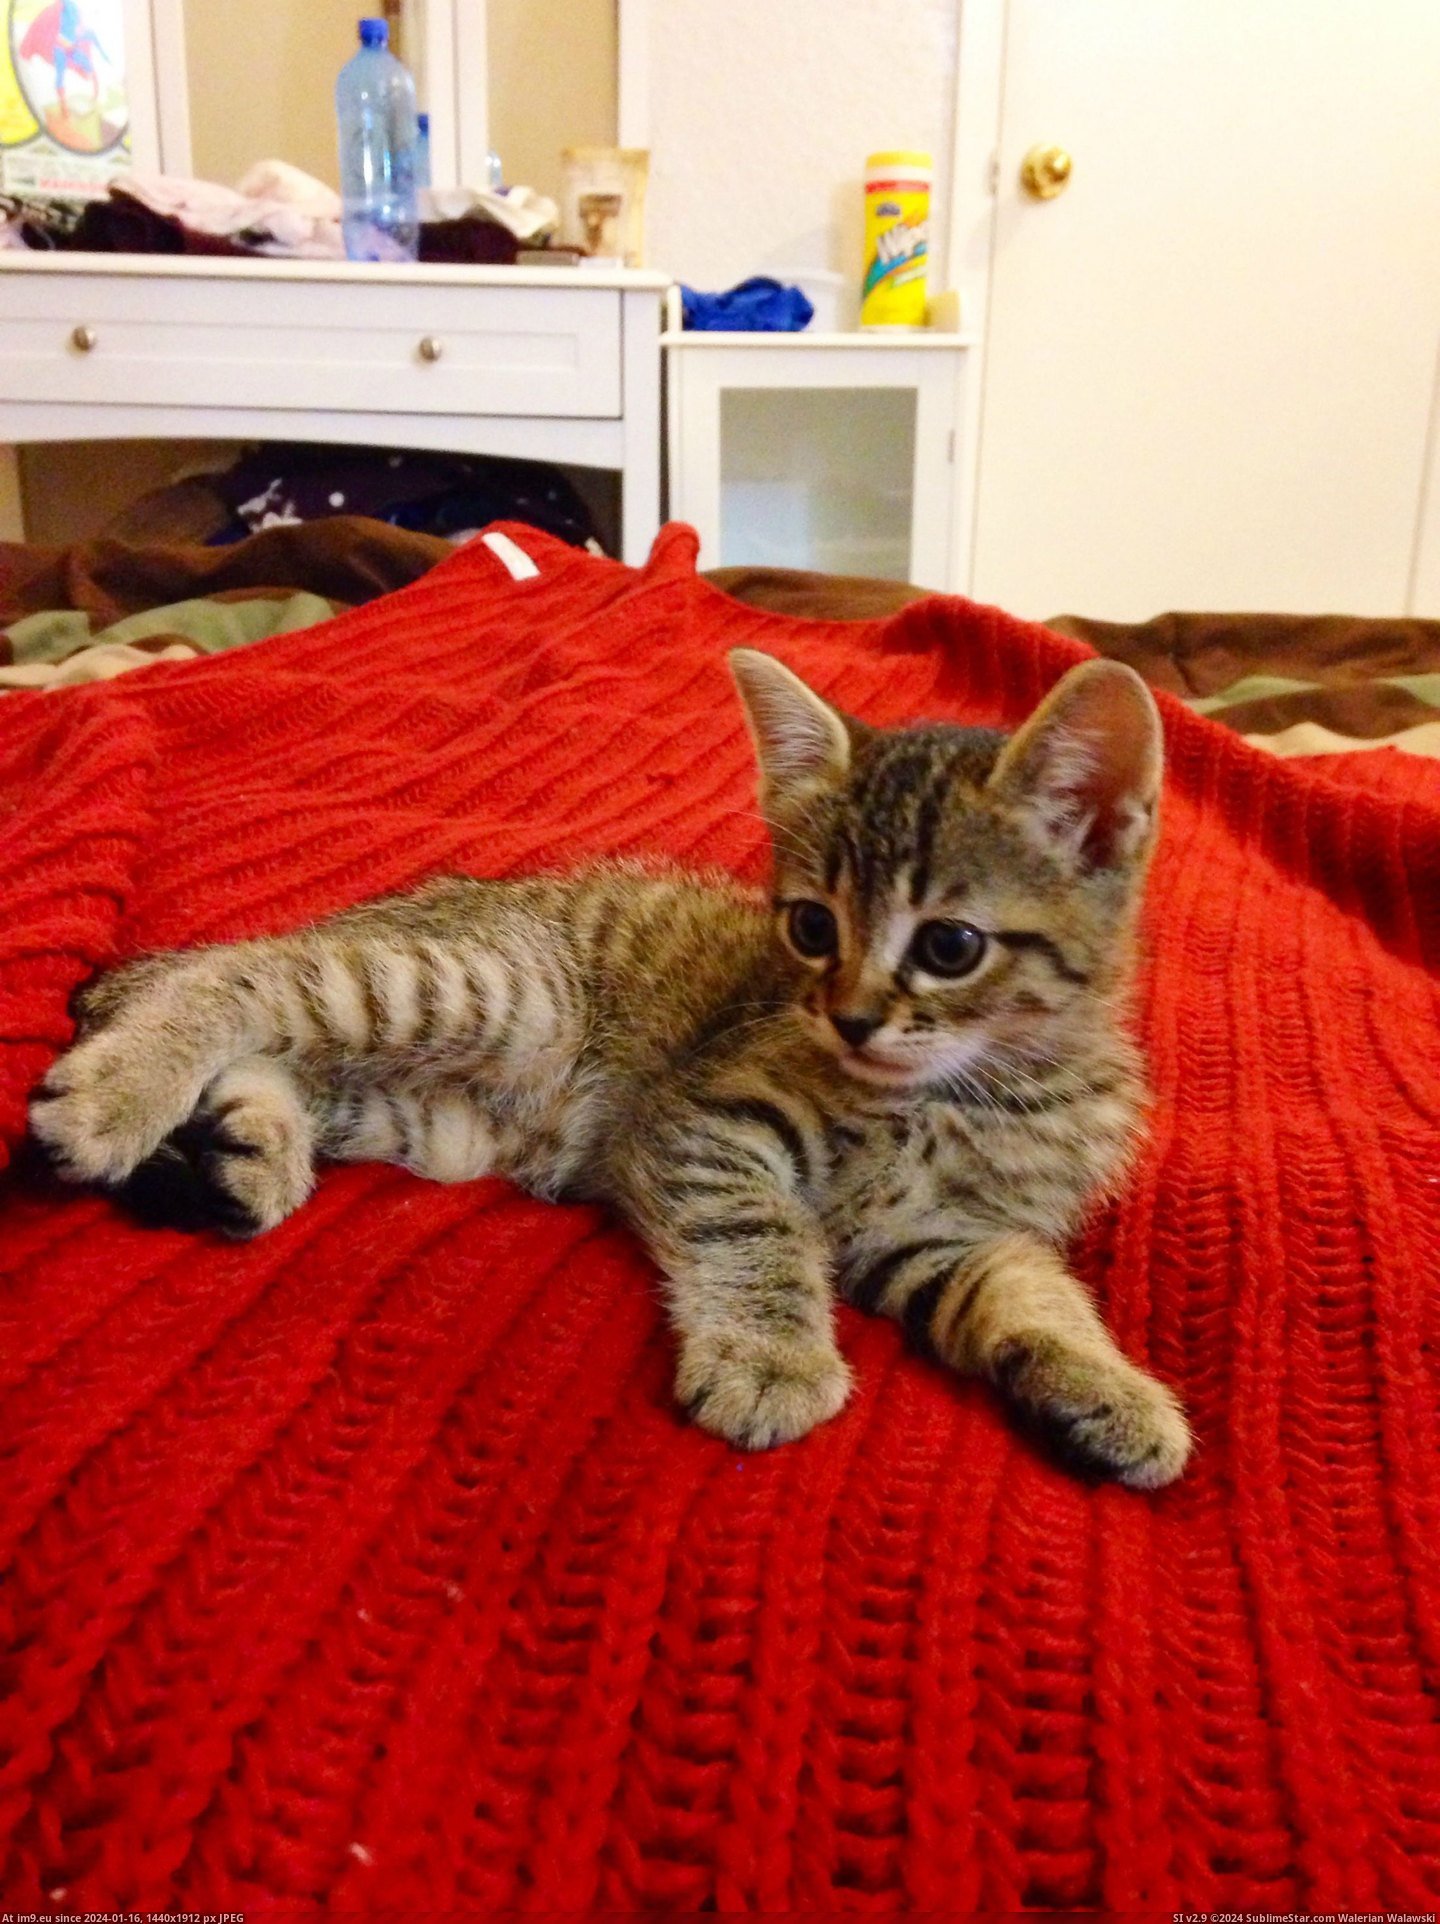 #Cats #New #Kitten #Too #Figured #Belonged #Jester #Meet #Our #Posted [Cats] Posted this in r-aww, figured it belonged here too. Meet our new kitten, Jester! 8 Pic. (Obraz z album My r/CATS favs))